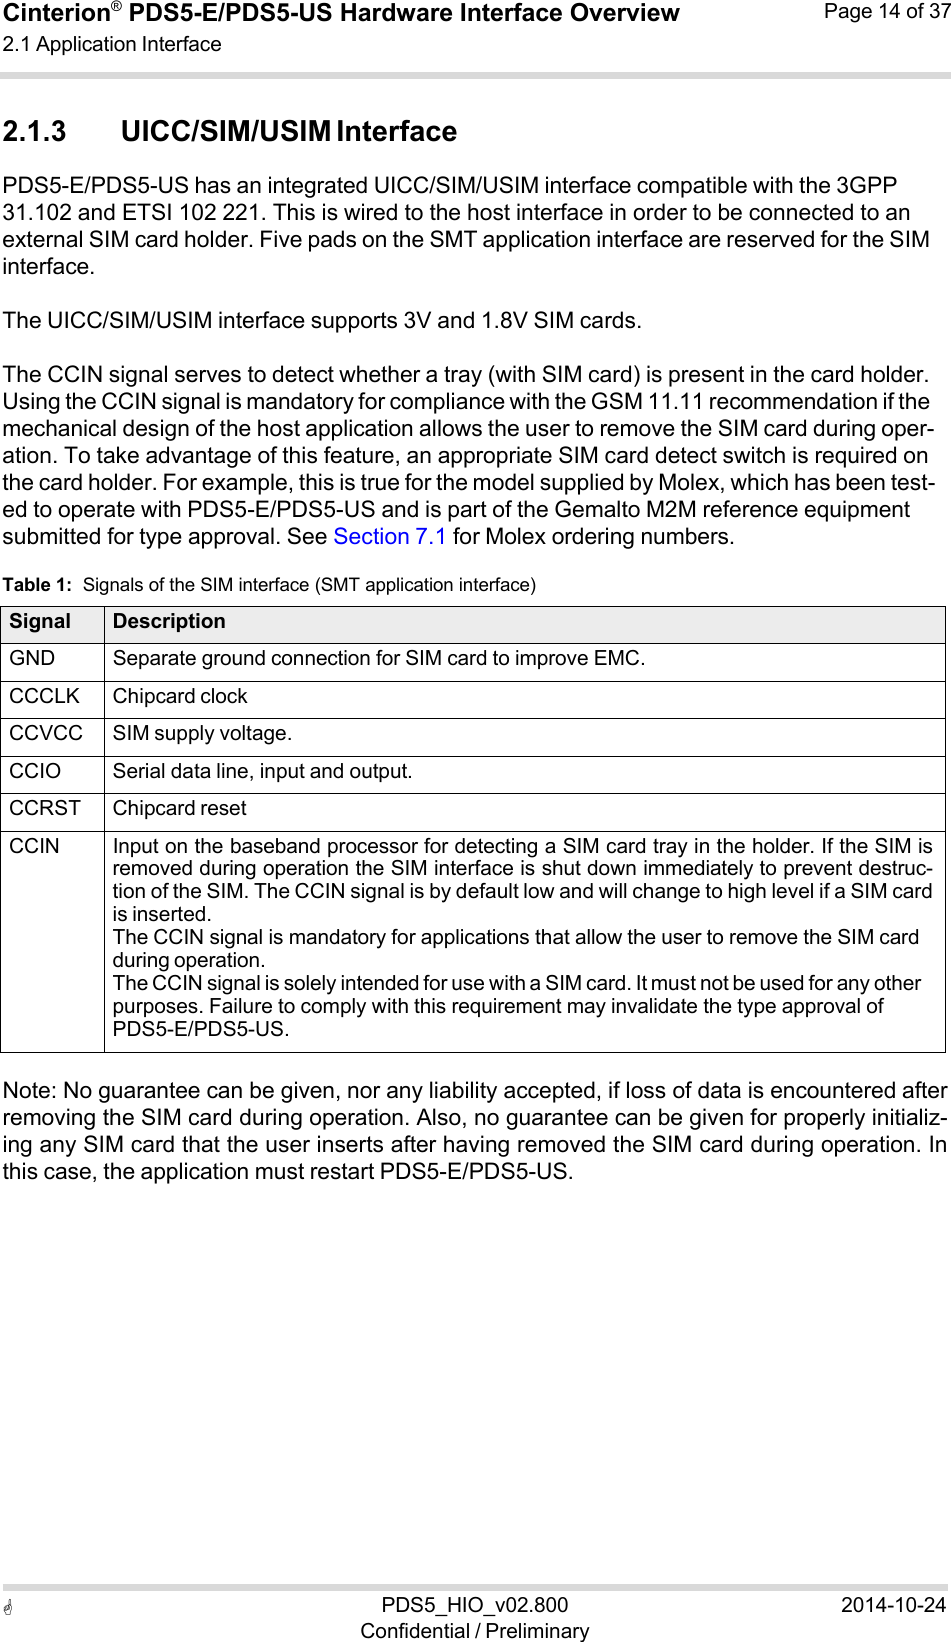  PDS5_HIO_v02.800Confidential / Preliminary2014-10-24Cinterion®  PDS5-E/PDS5-US Hardware Interface Overview2.1 Application Interface Page 14 of 37   2.1.3 UICC/SIM/USIM Interface PDS5-E/PDS5-US has an integrated UICC/SIM/USIM interface compatible with the 3GPP 31.102 and ETSI 102 221. This is wired to the host interface in order to be connected to an external SIM card holder. Five pads on the SMT application interface are reserved for the SIM interface.  The UICC/SIM/USIM interface supports 3V and 1.8V SIM cards.  The CCIN signal serves to detect whether a tray (with SIM card) is present in the card holder. Using the CCIN signal is mandatory for compliance with the GSM 11.11 recommendation if the mechanical design of the host application allows the user to remove the SIM card during oper- ation. To take advantage of this feature, an appropriate SIM card detect switch is required on the card holder. For example, this is true for the model supplied by Molex, which has been test- ed to operate with PDS5-E/PDS5-US and is part of the Gemalto M2M reference equipment submitted for type approval. See Section 7.1 for Molex ordering numbers.  Table 1:  Signals of the SIM interface (SMT application interface)  Signal DescriptionGND Separate ground connection for SIM card to improve EMC.CCCLK Chipcard clock CCVCC SIM supply voltage. CCIO Serial data line, input and output.CCRST Chipcard reset CCIN Input on the baseband processor for detecting a SIM card tray in the holder. If the SIM is removed during operation the SIM interface is shut down immediately to prevent destruc-tion of the SIM. The CCIN signal is by default low and will change to high level if a SIM card is inserted. The CCIN signal is mandatory for applications that allow the user to remove the SIM card during operation. The CCIN signal is solely intended for use with a SIM card. It must not be used for any other purposes. Failure to comply with this requirement may invalidate the type approval of PDS5-E/PDS5-US.  Note: No guarantee can be given, nor any liability accepted, if loss of data is encountered after removing the SIM card during operation. Also, no guarantee can be given for properly initializ- ing any SIM card that the user inserts after having removed the SIM card during operation. In this case, the application must restart PDS5-E/PDS5-US. 